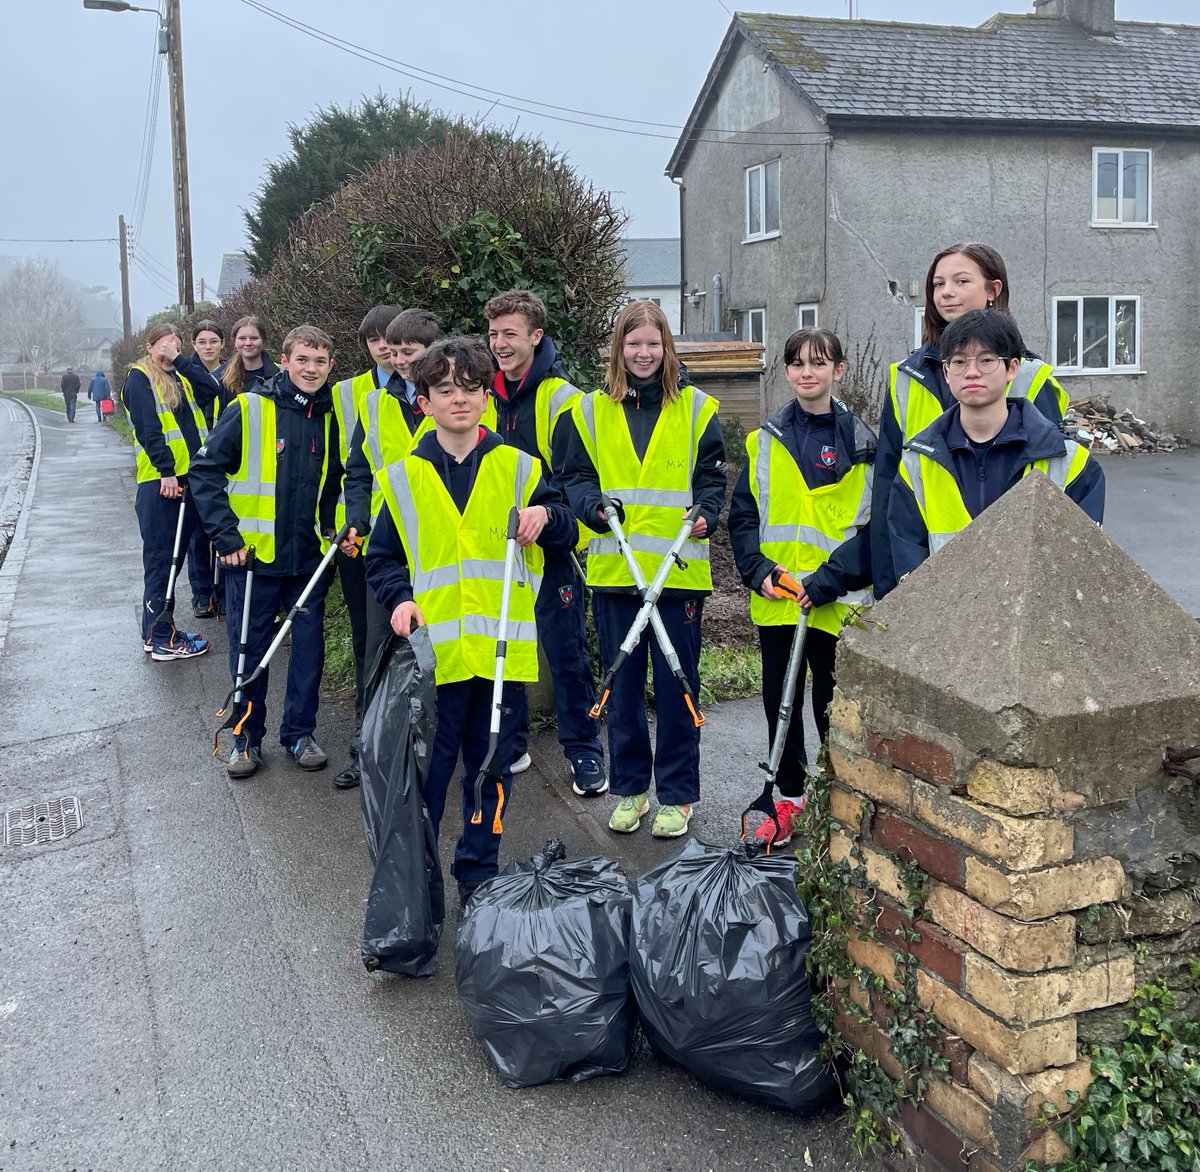 Year 9 pupils continue to volunteer for #TidyTavi as part of their #DofE programme. Another group is also helping to keep #Yelverton Play Park clean and tidy.
#volunteering